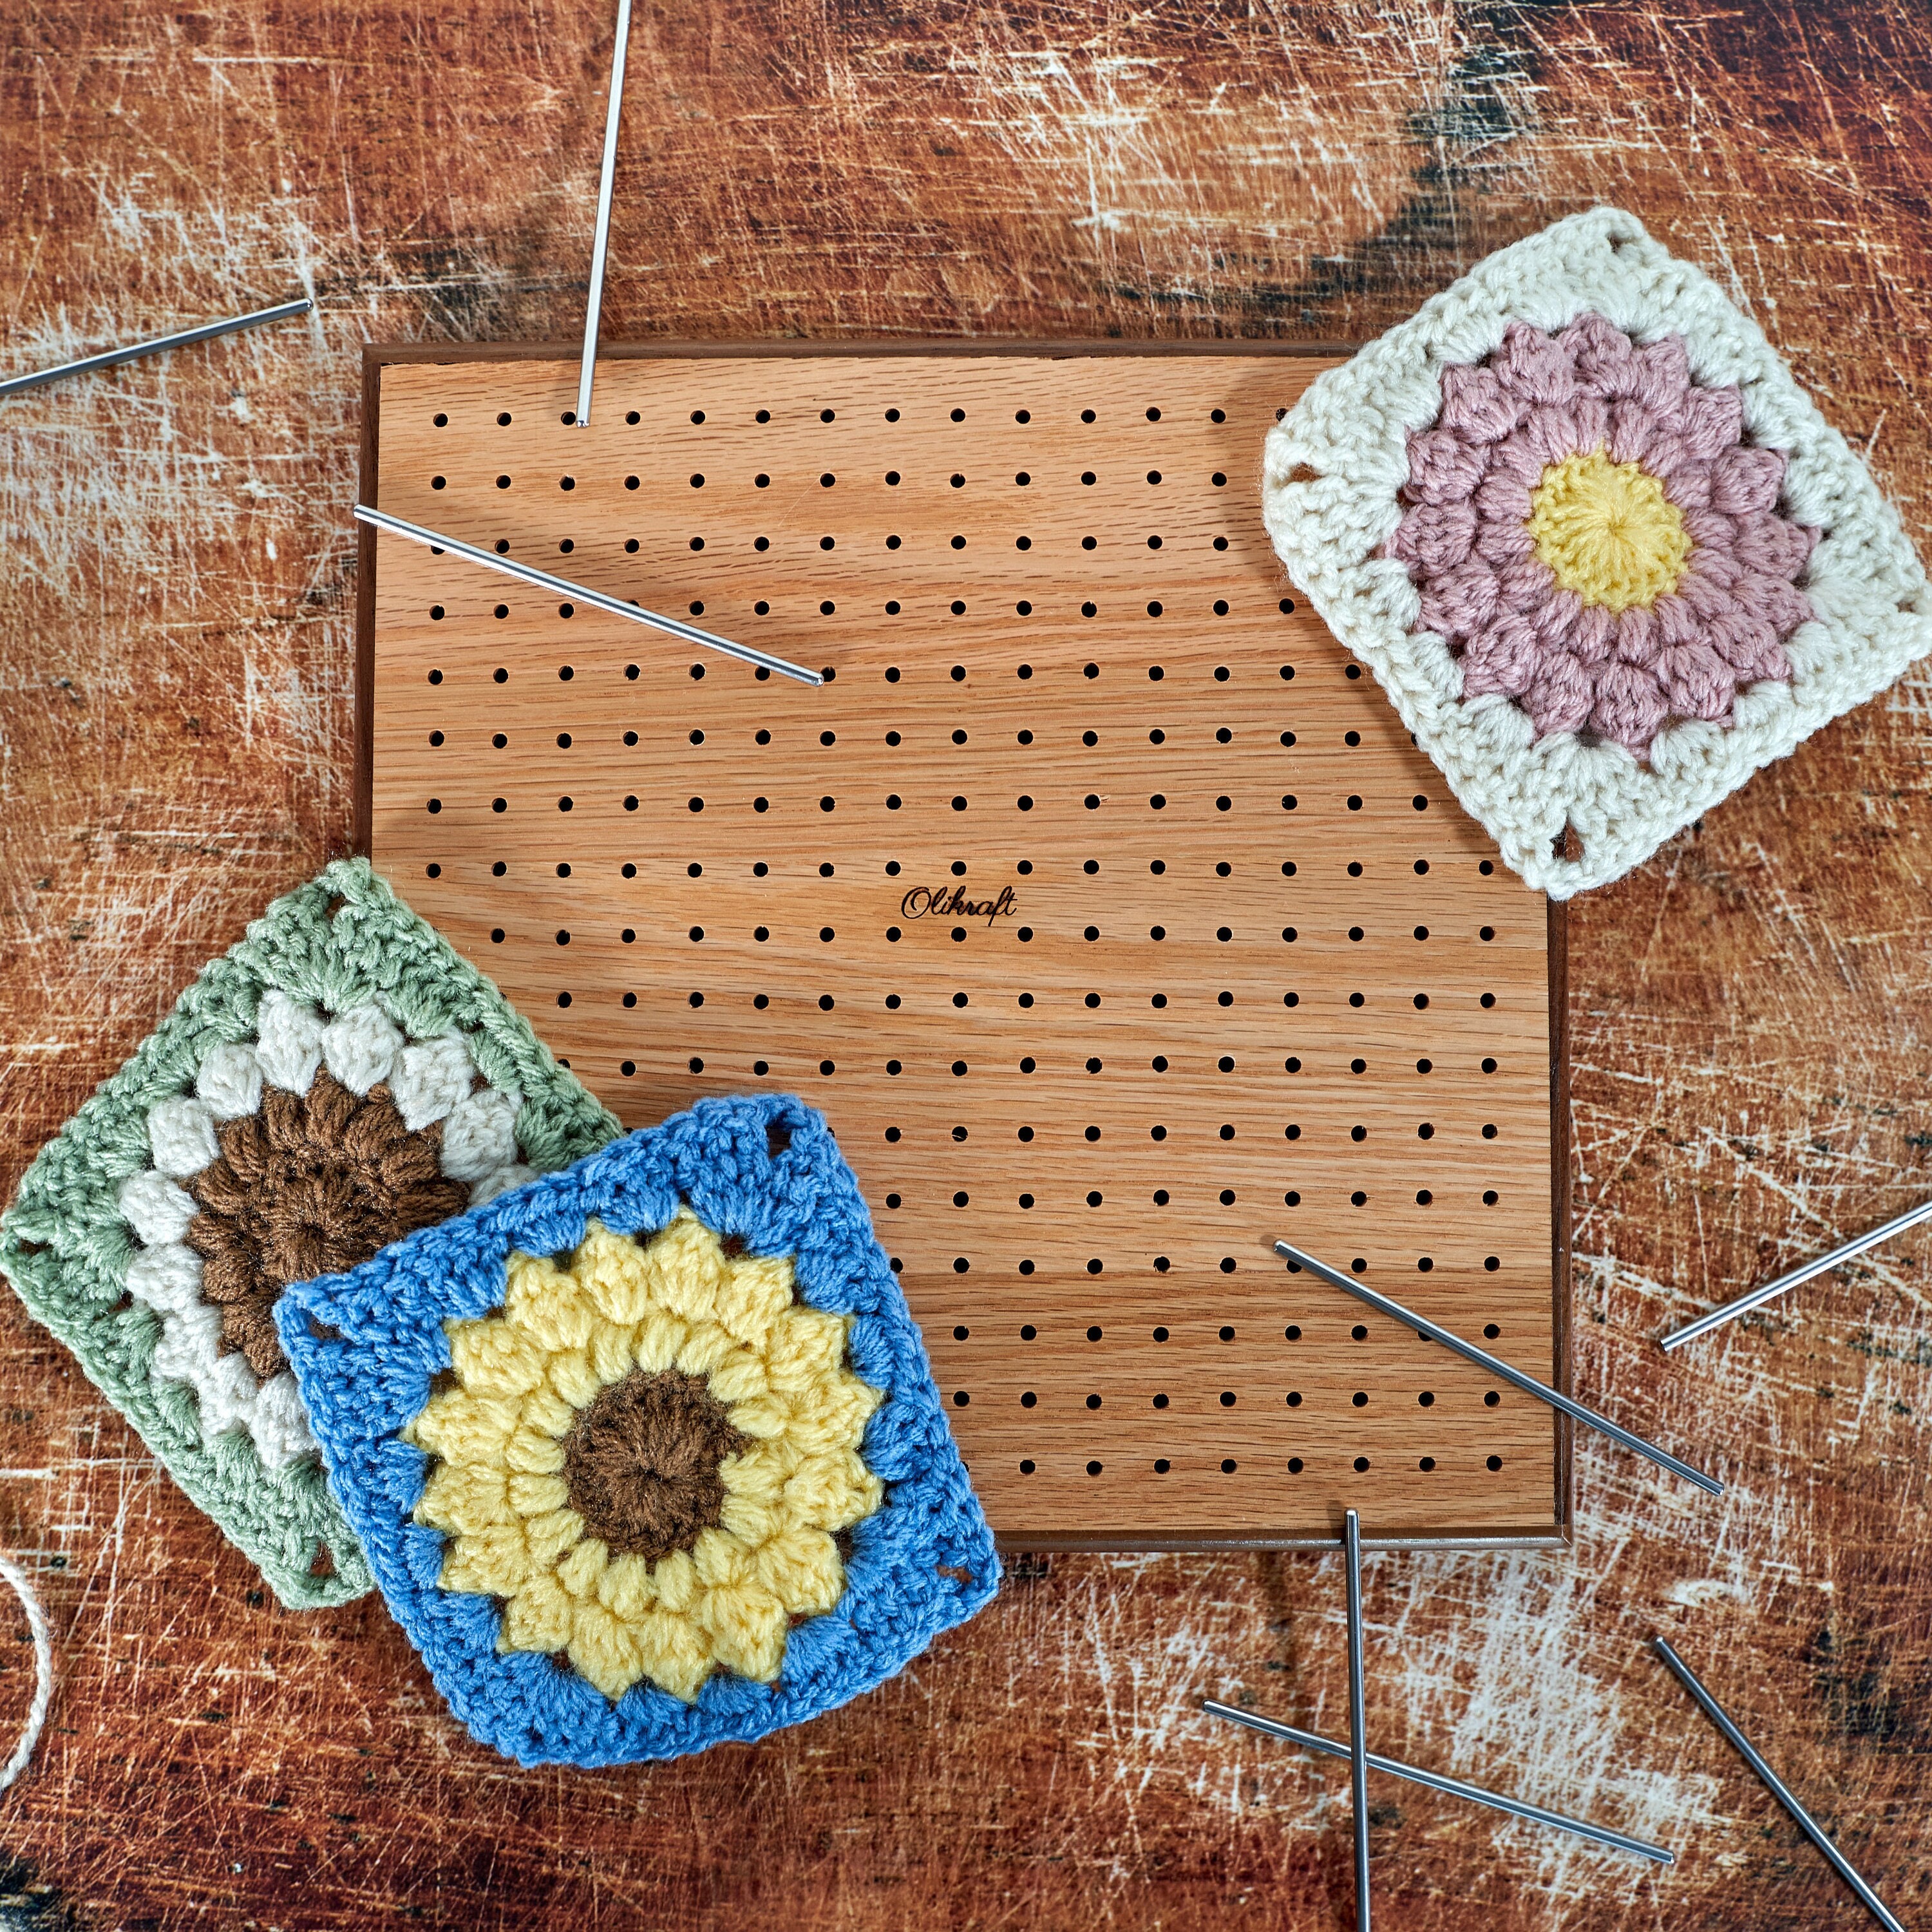 Wooden Crochet Blocking Board Reusable Handcrafted Knitting Blocking Mat  for Knitting Grannys Square NeedleworksLovers Blocking Board for Crocheting